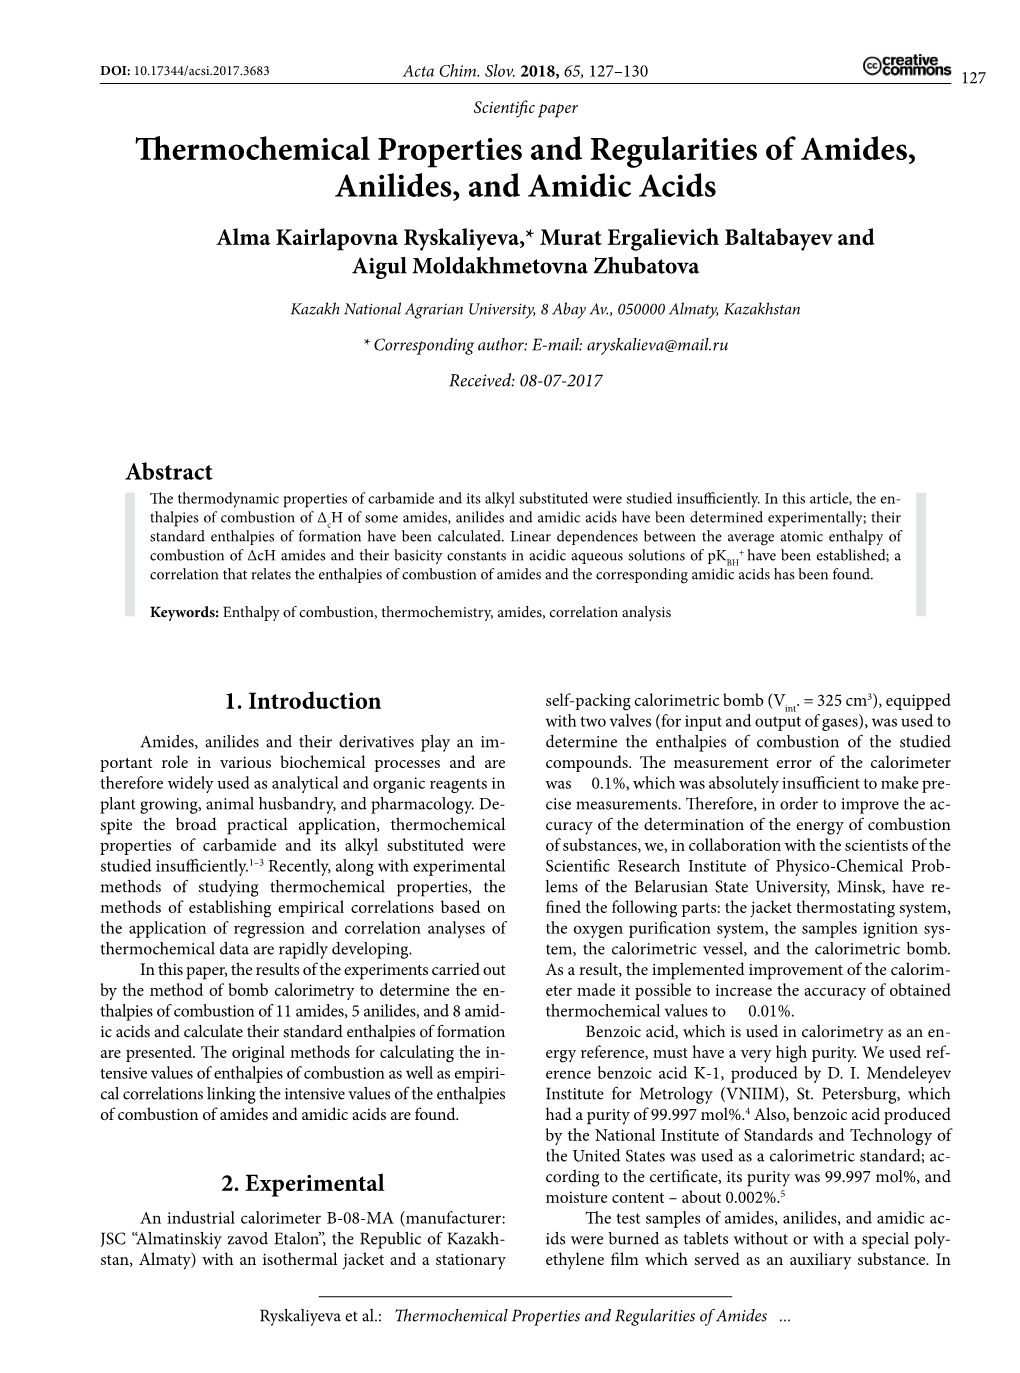 Thermochemical Properties and Regularities of Amides, Anilides